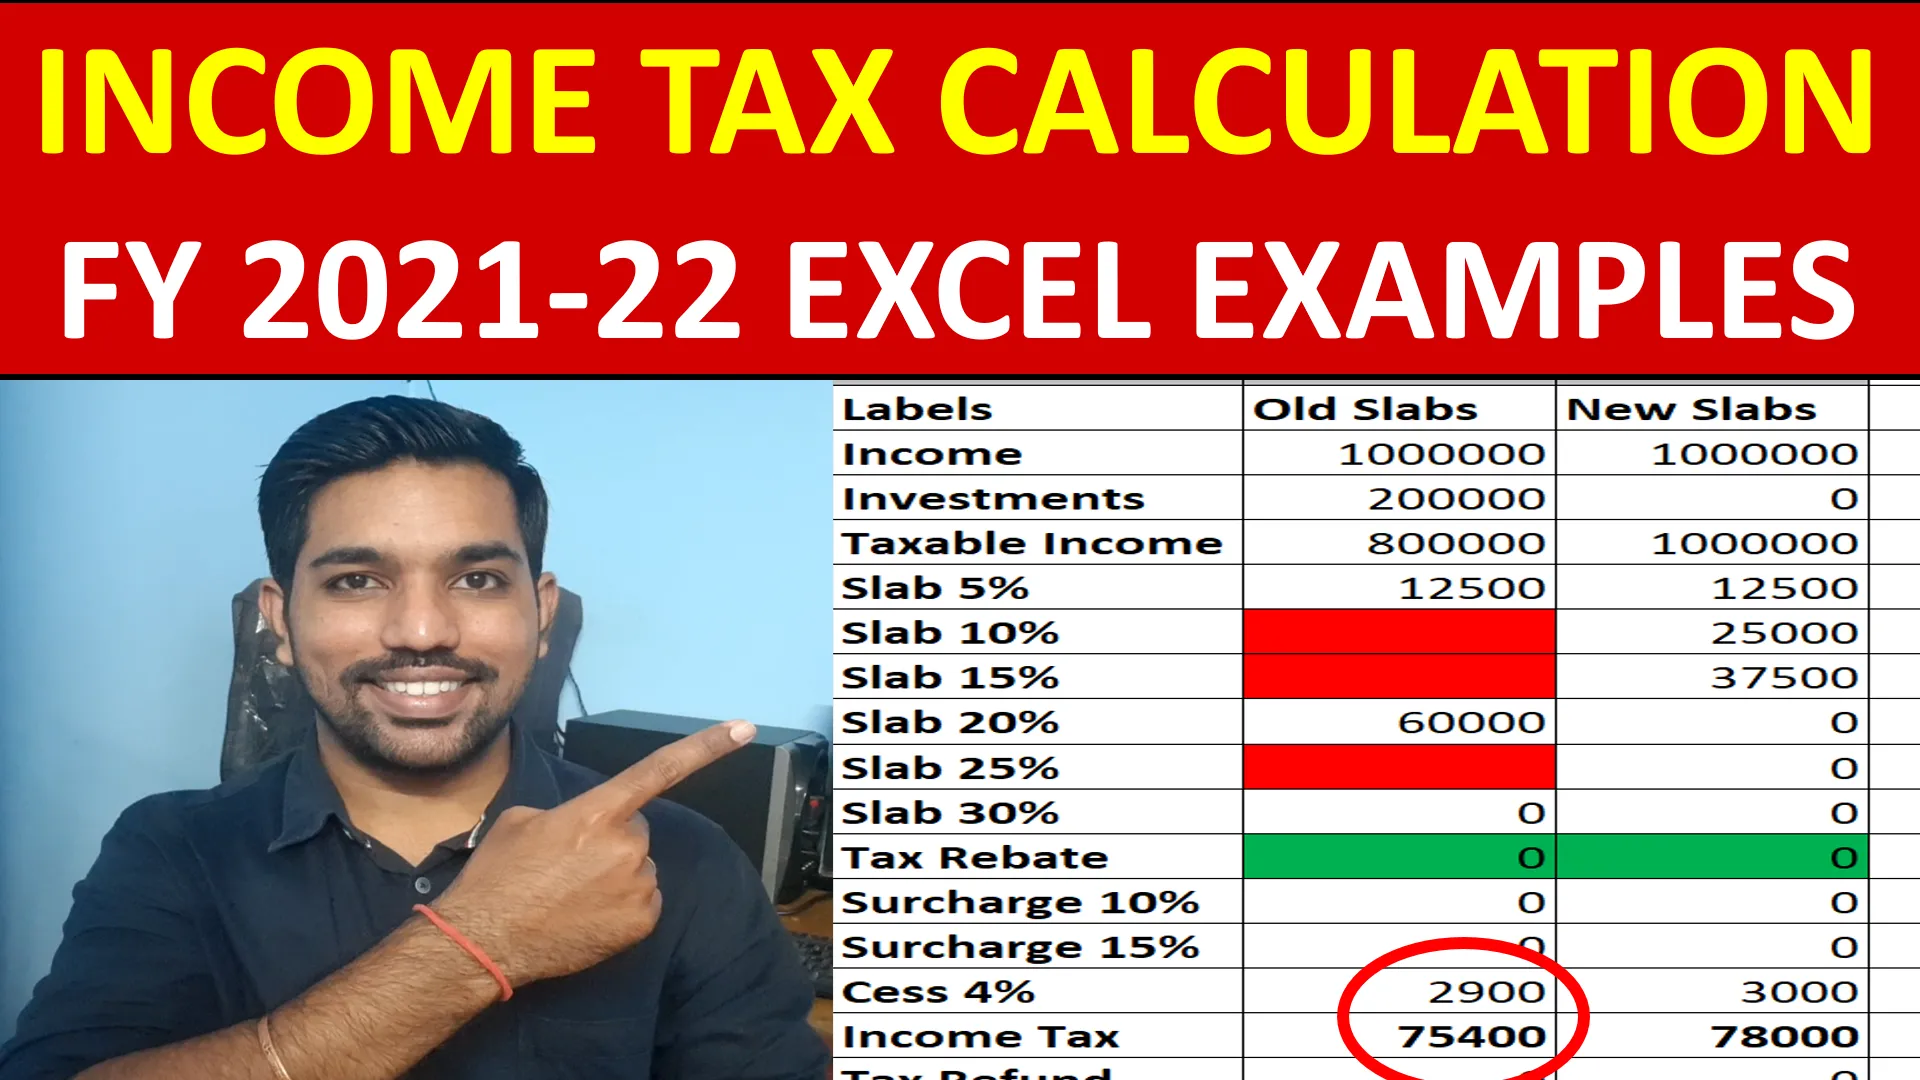 Video How To Calculate Income Tax In Fy 2021 22 On Salary Examples New Slab Rates And Rebate 2221